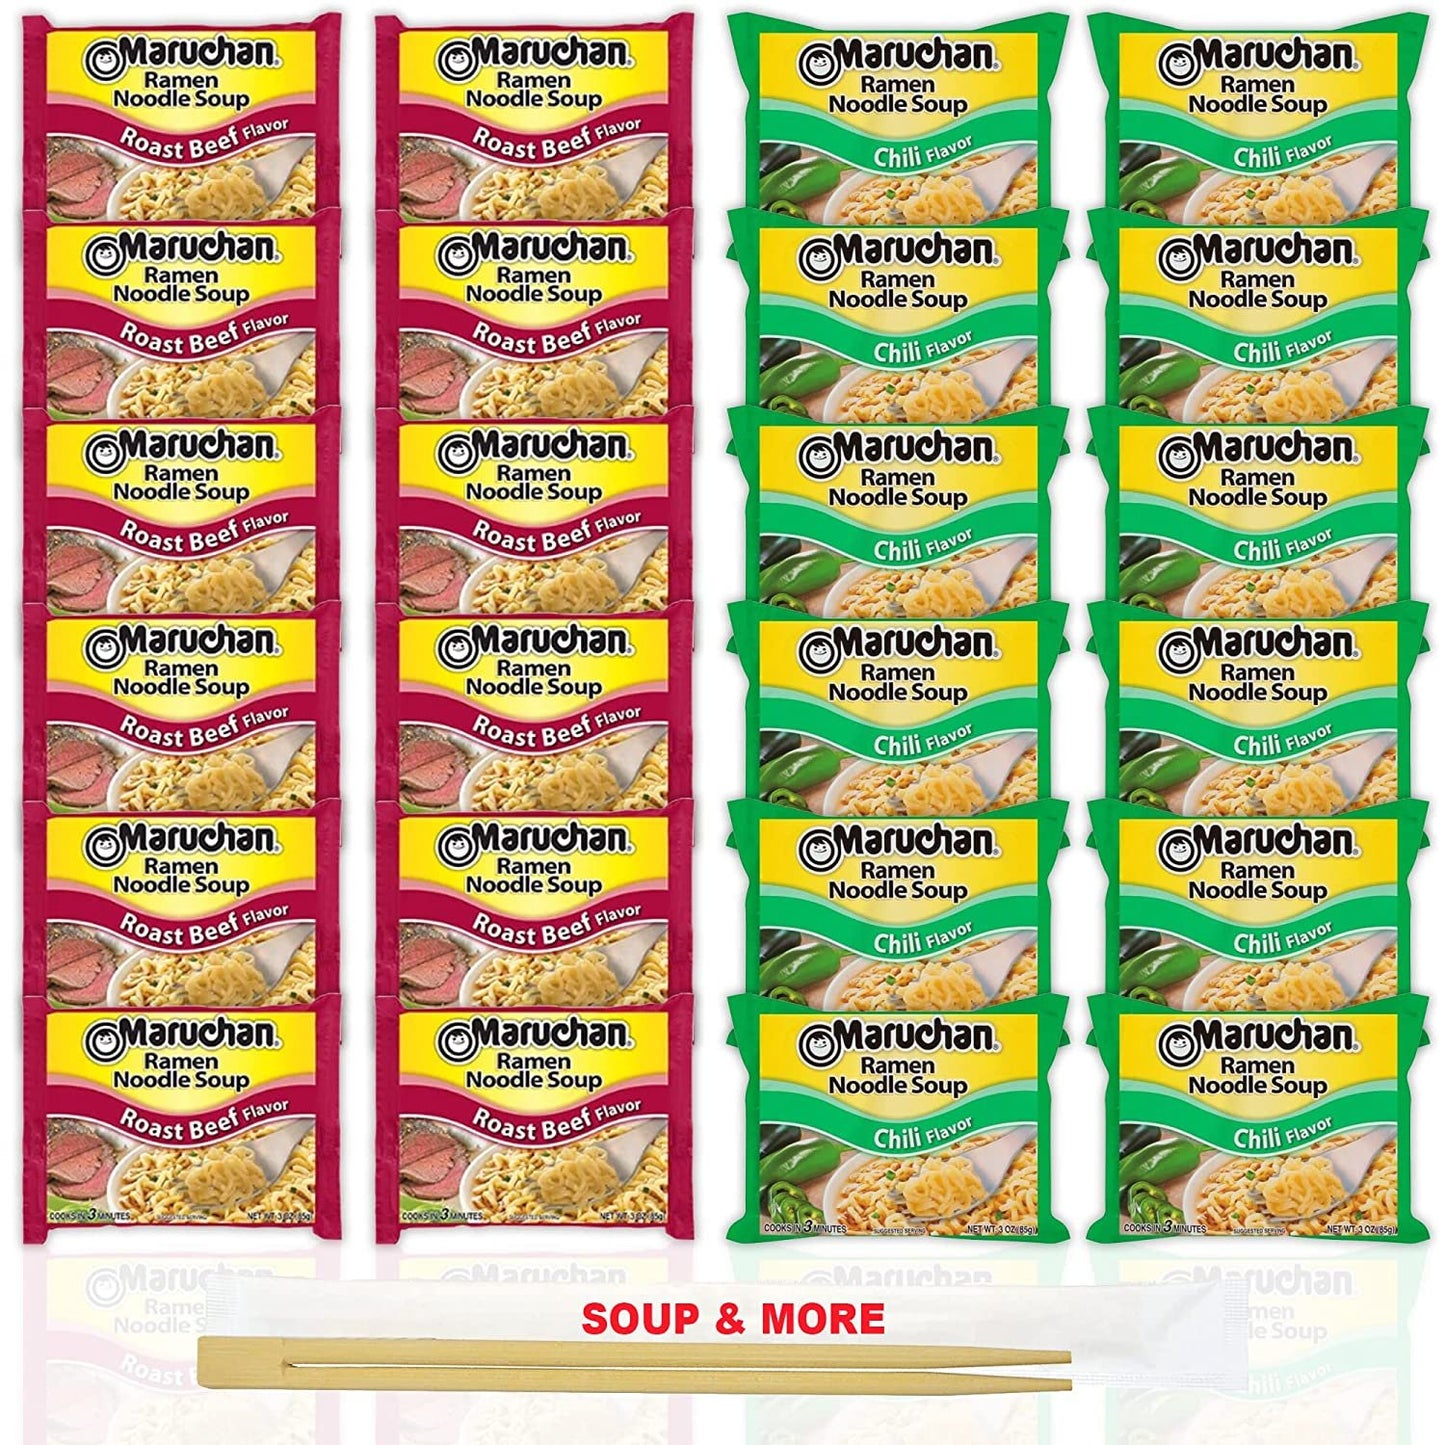 Maruchan Ramen Instant Noodle Soup Variety, 2 Flavors - 12 Packs Roast Beef & 12 Packs Chili , 3 Ounce Single Servings Lunch / Dinner Variety